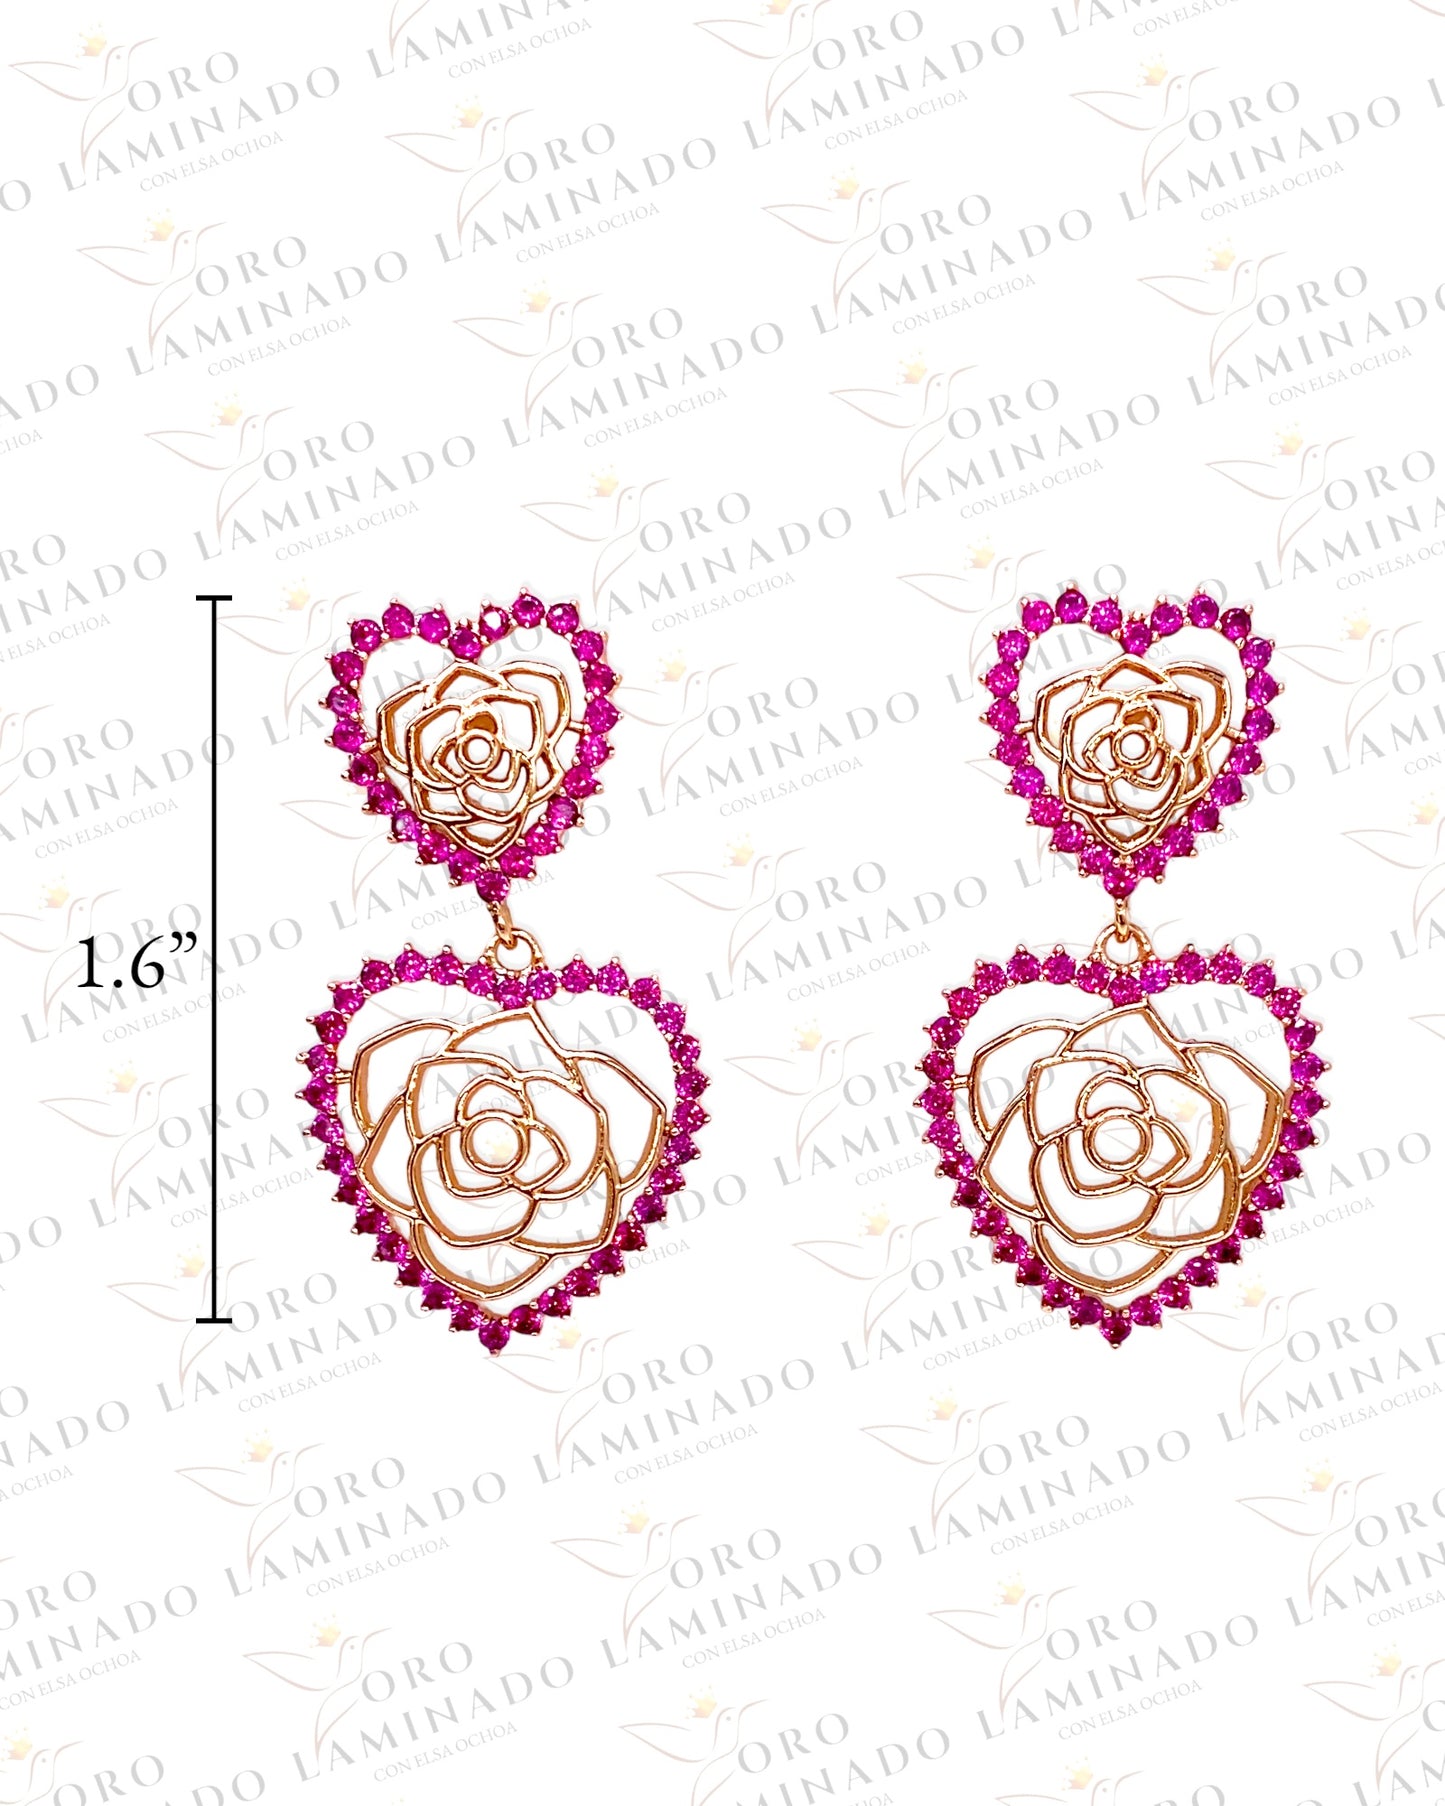 High Quality 1.6” Double Heart Earrings With Pink Stones B178